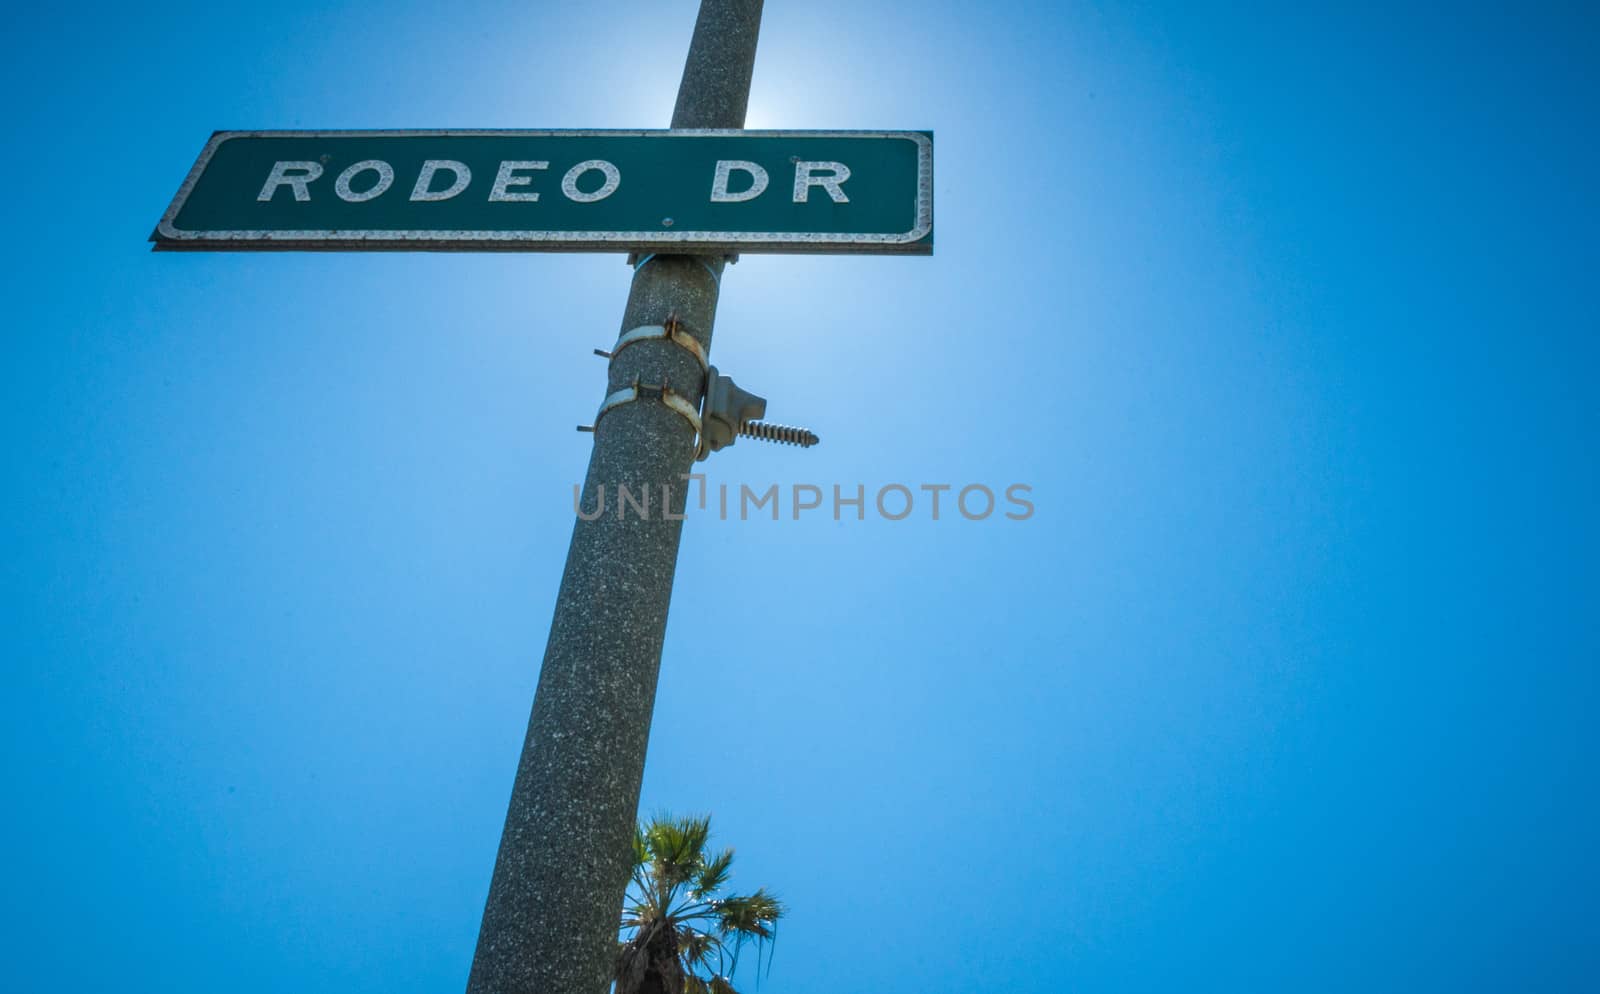 Rodeo Drive Strret sign in Beverly Hills by weltreisendertj